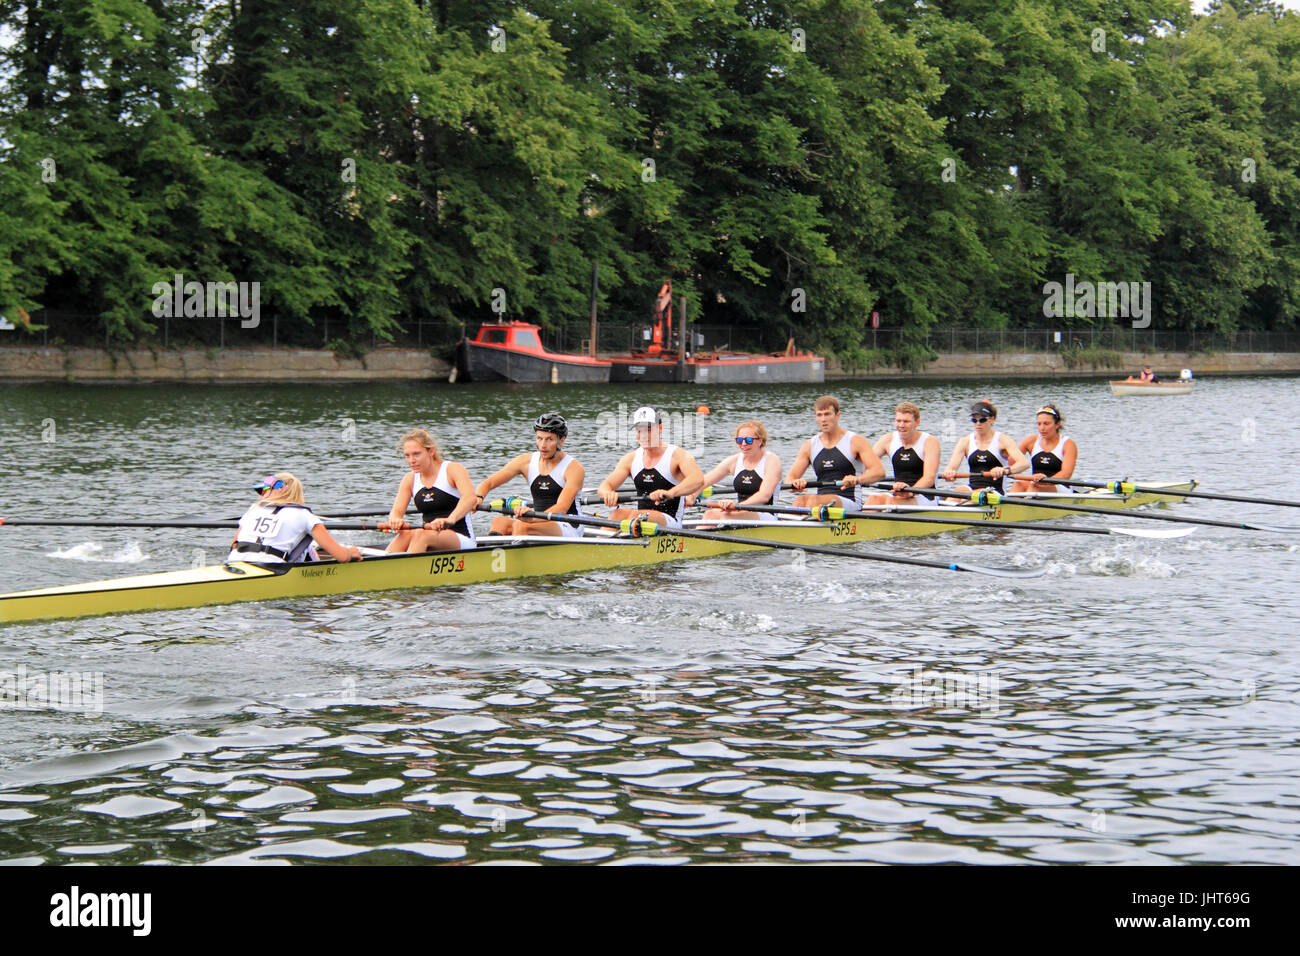 Molesey Boat Club (Winners). Mixed Elite Eight FINAL. 150th Molesey Amateur Regatta, 15th July 2017, River Thames, Hurst Park Riverside, East Molesey, near Hampton Court, Surrey, England, Great Britain, United Kingdom, UK, Europe. Annual amateur rowing competition and social event established in 1867. Credit:  Ian Bottle/Alamy Live News Stock Photo